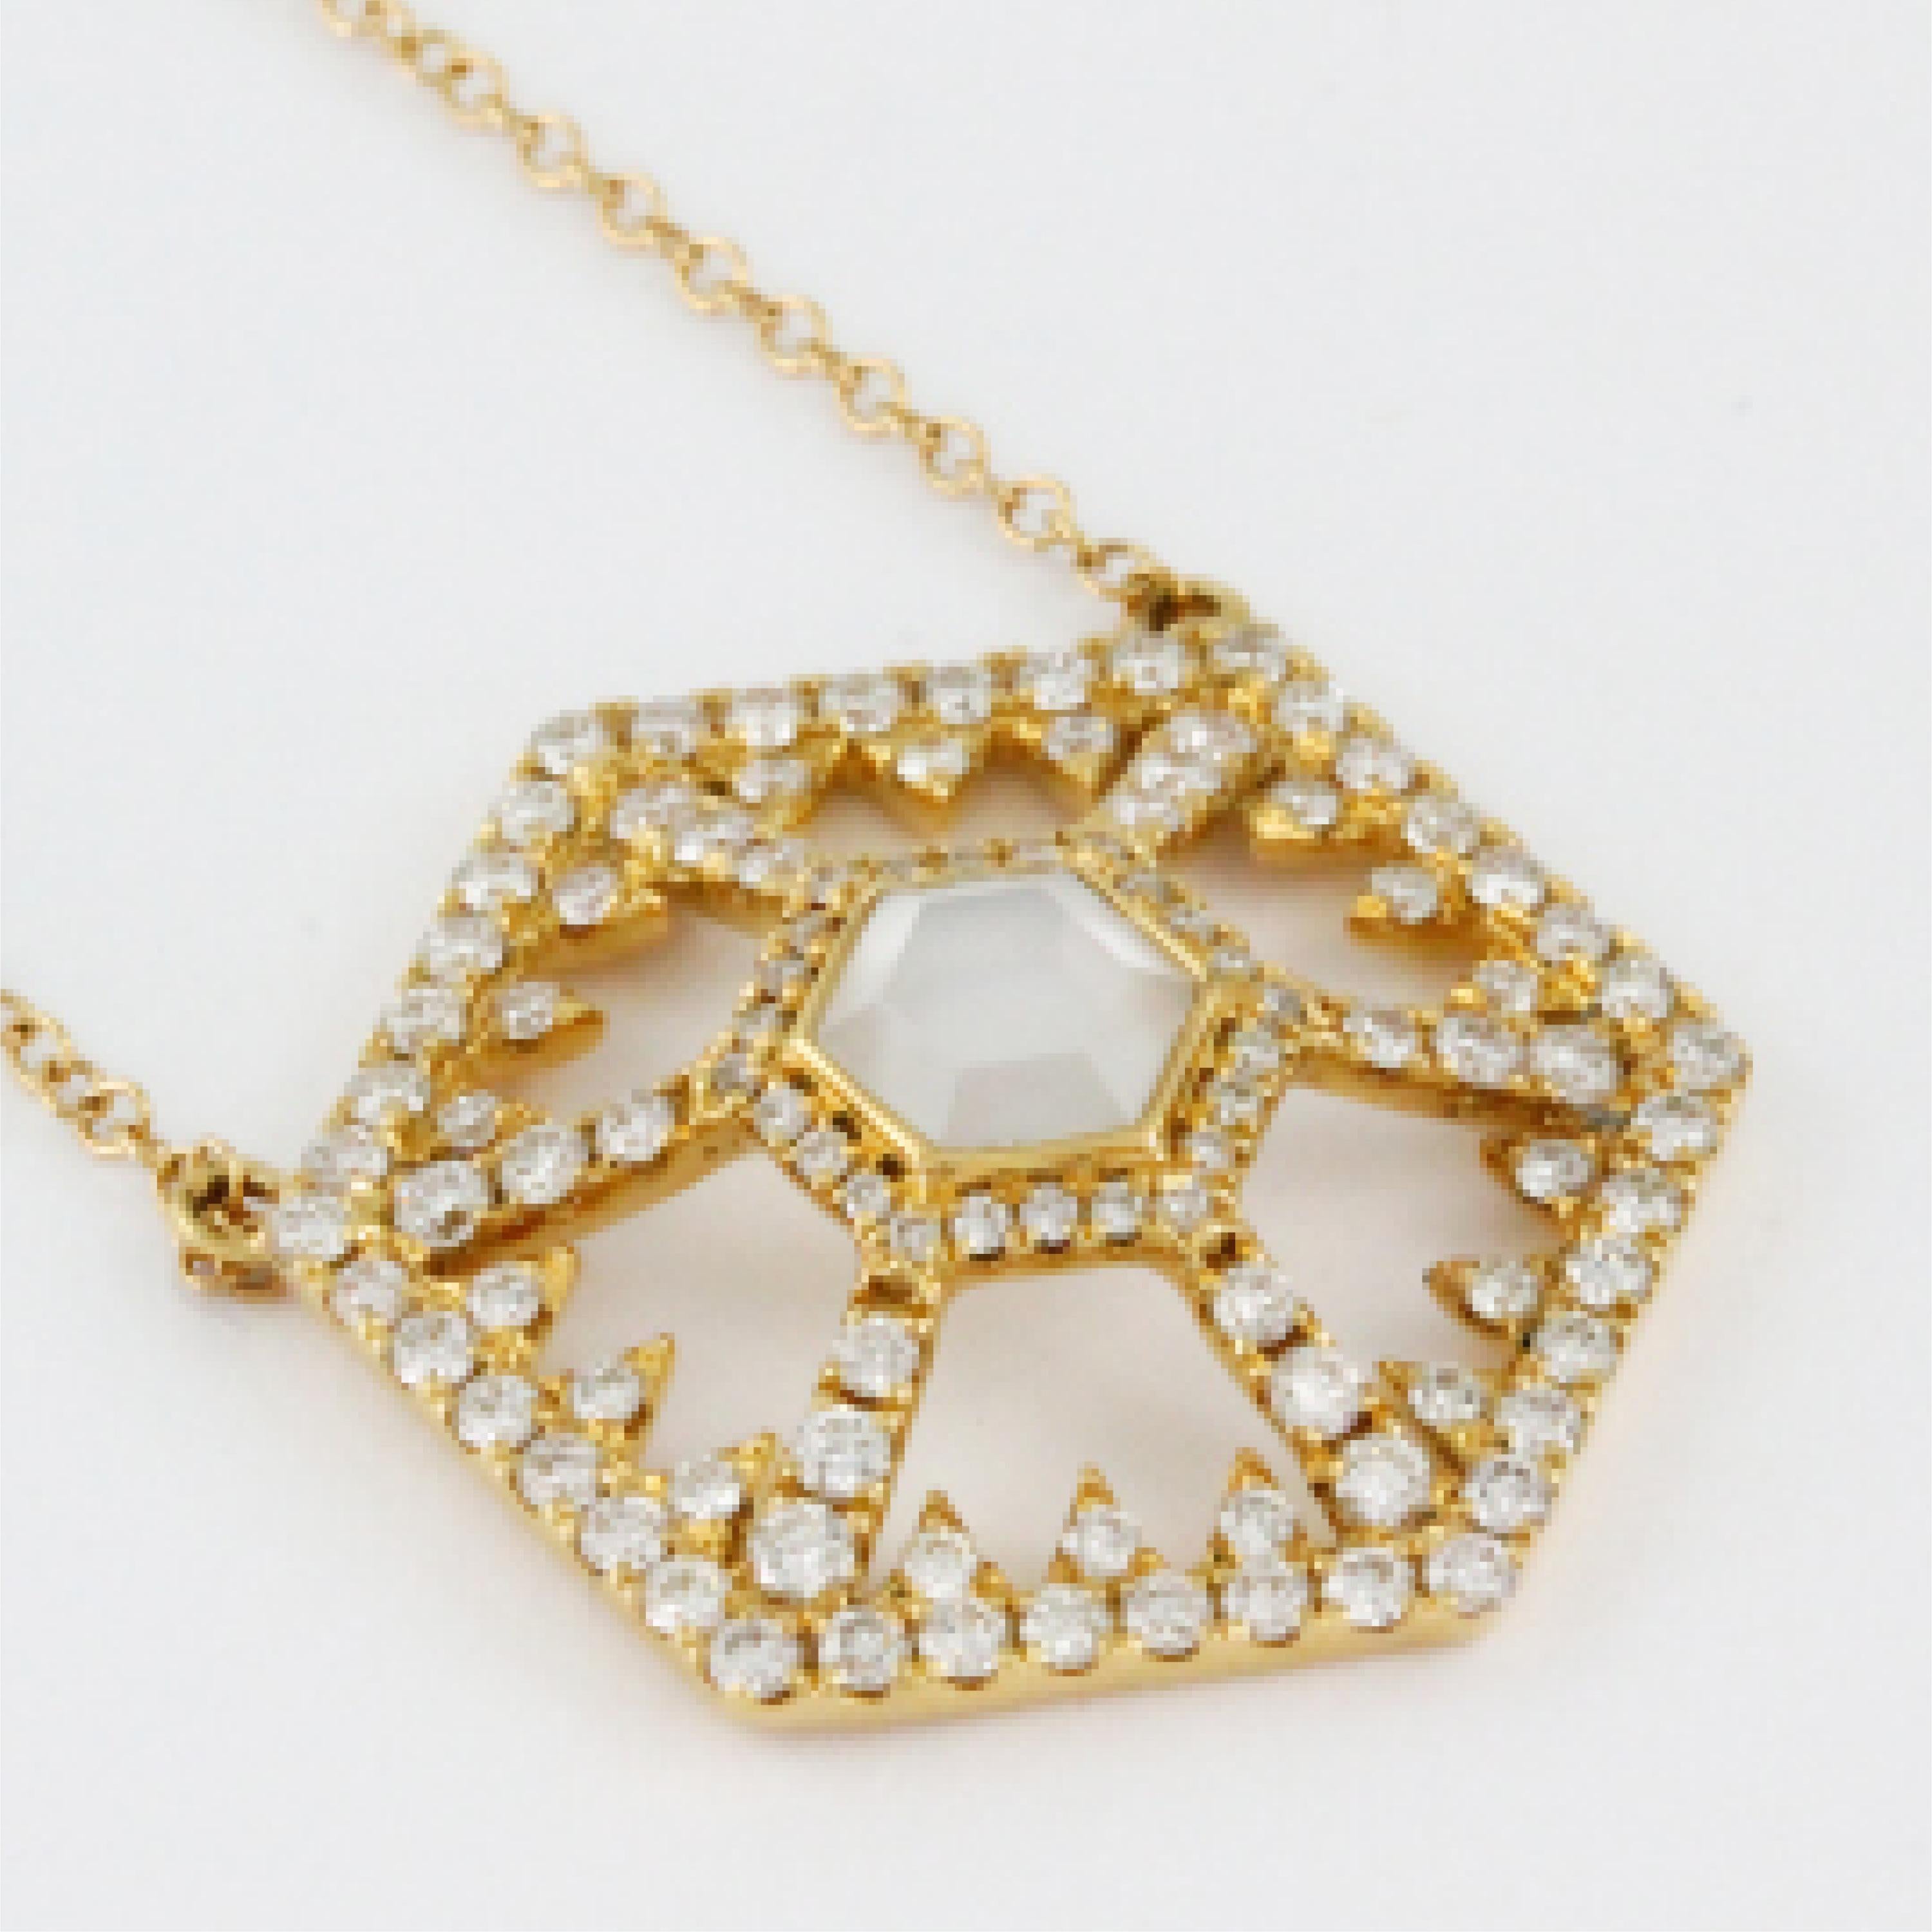 Contemporary 18K Gold Hexagon Fashion Necklace with White Mother of Pearl Quartz and Diamonds For Sale